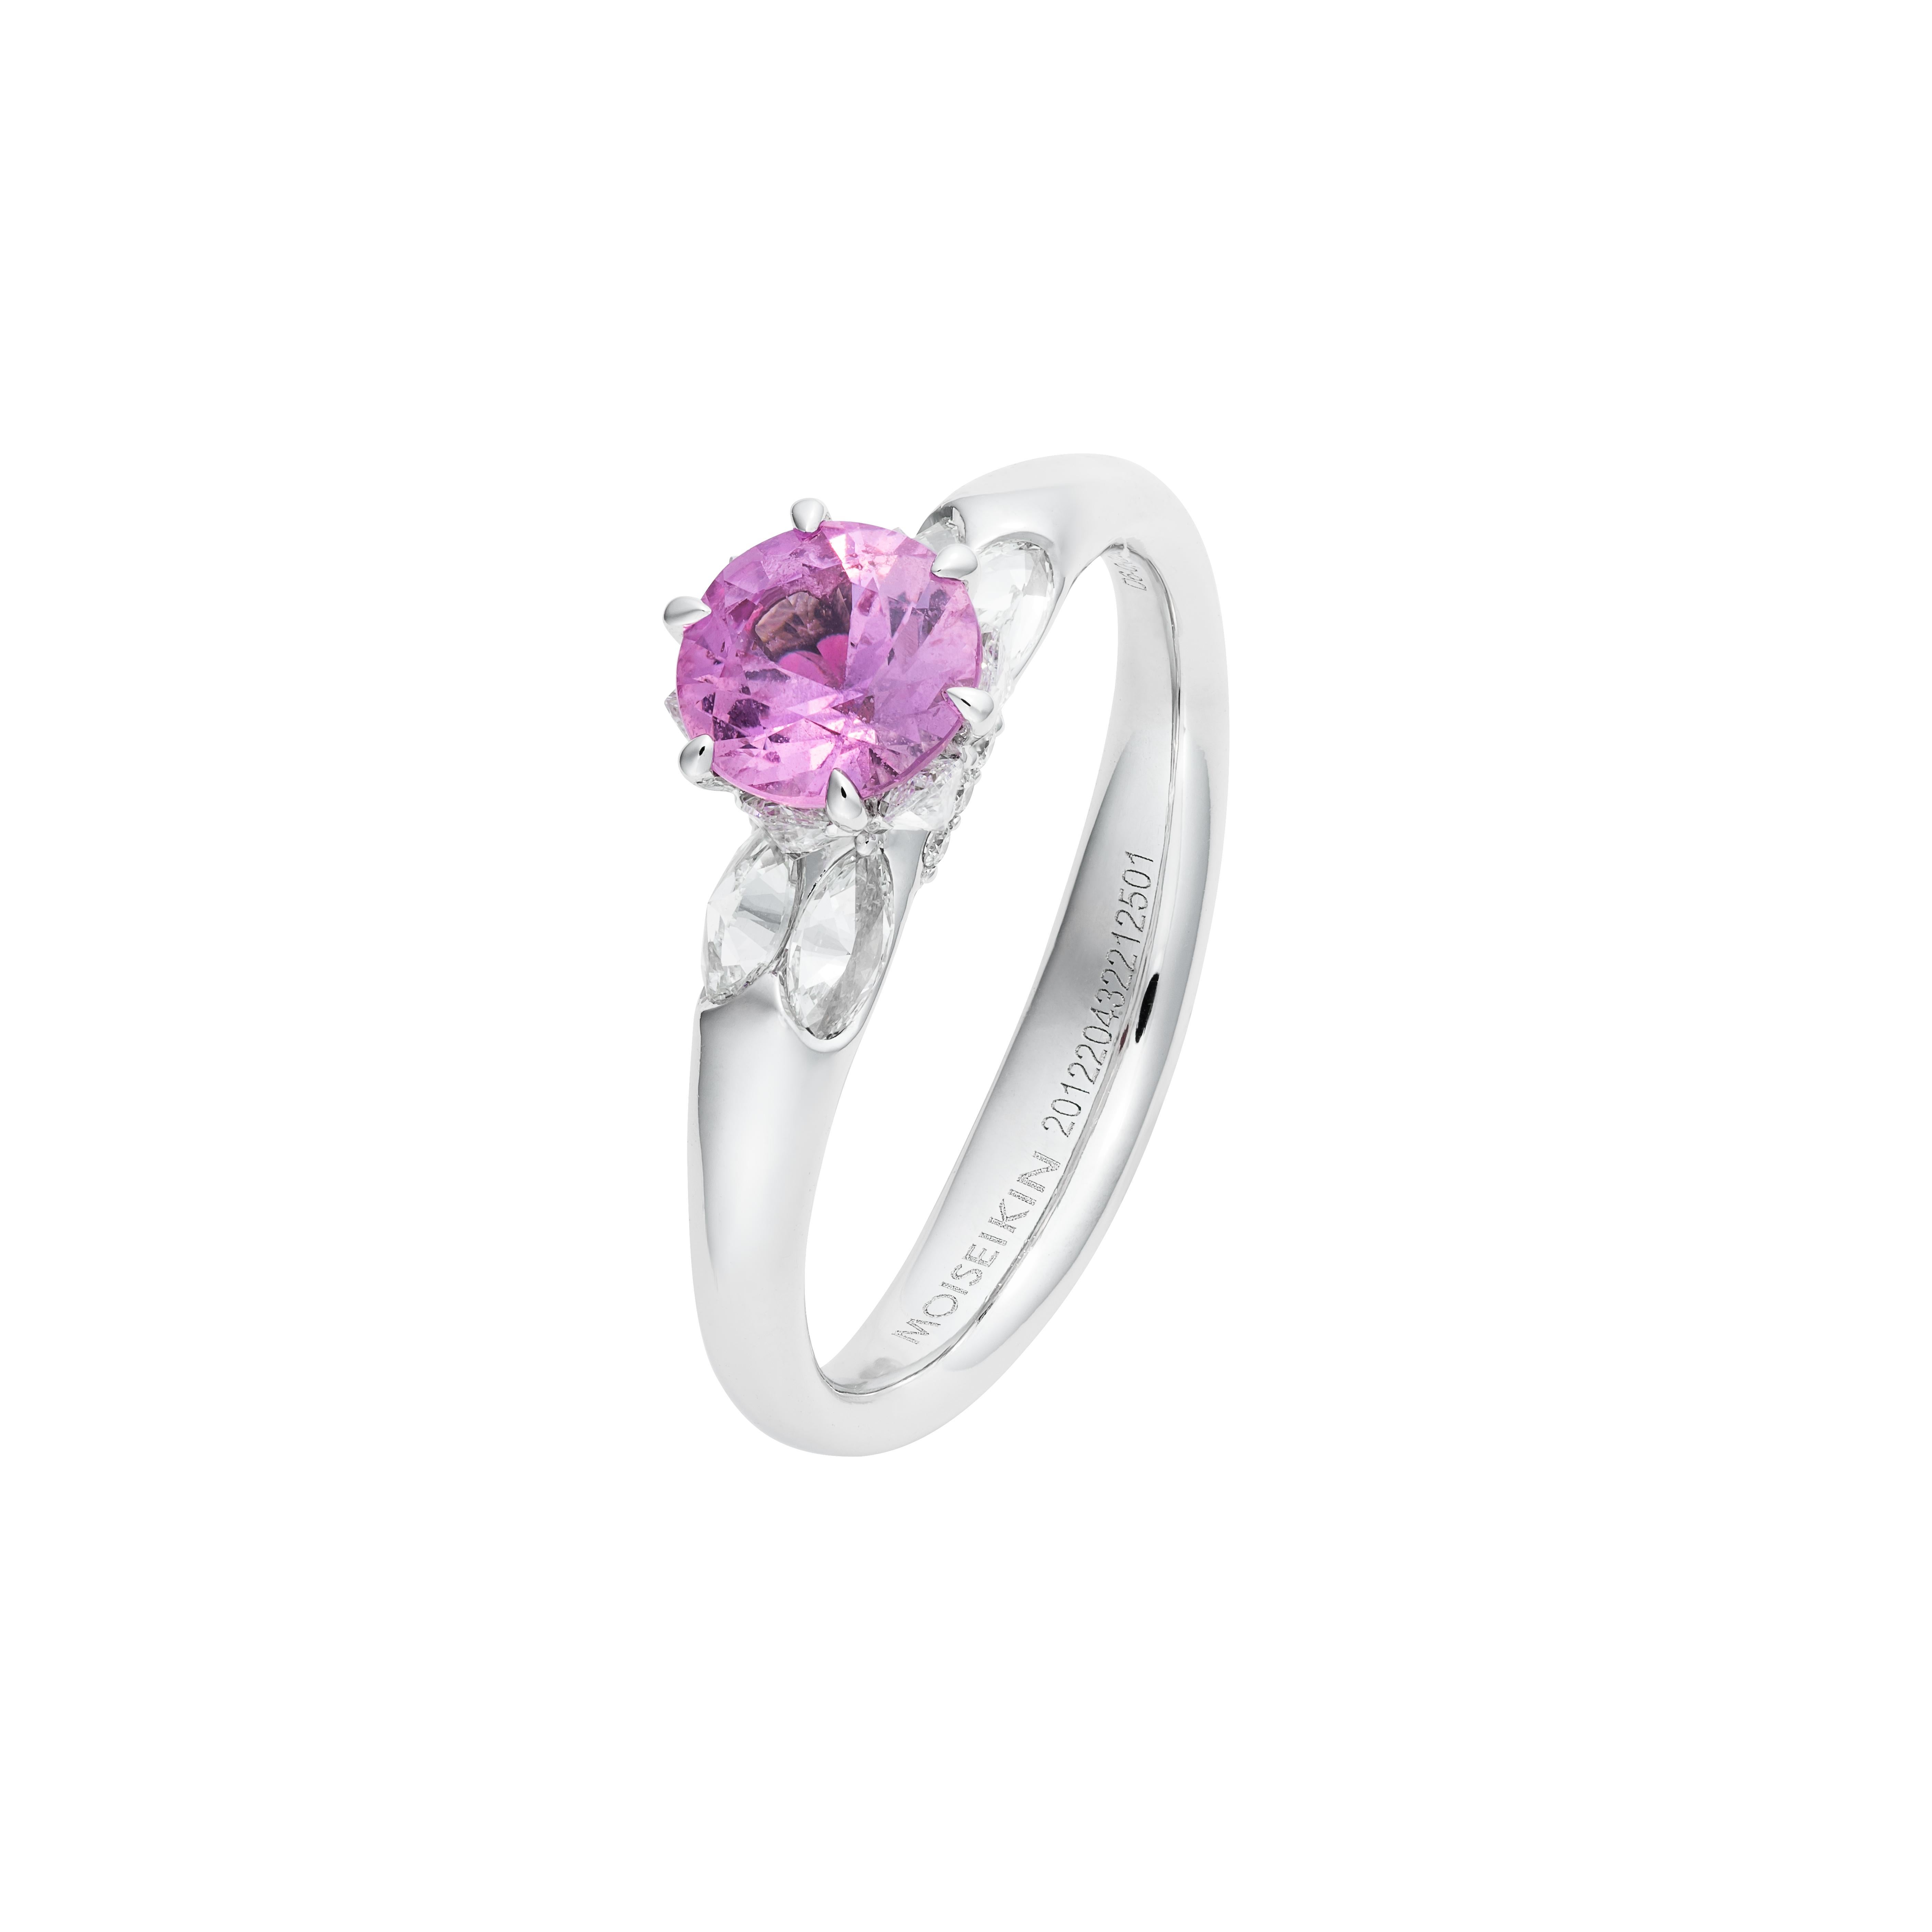 Made from 18K white gold, the Lotus Ring from Moiseikin's Harmony of Water collection exudes elegance and grace.
At its heart lies a captivating 0.90ct pink sapphire, cradled by marquis diamond petals in a reverse setting. This unique technique